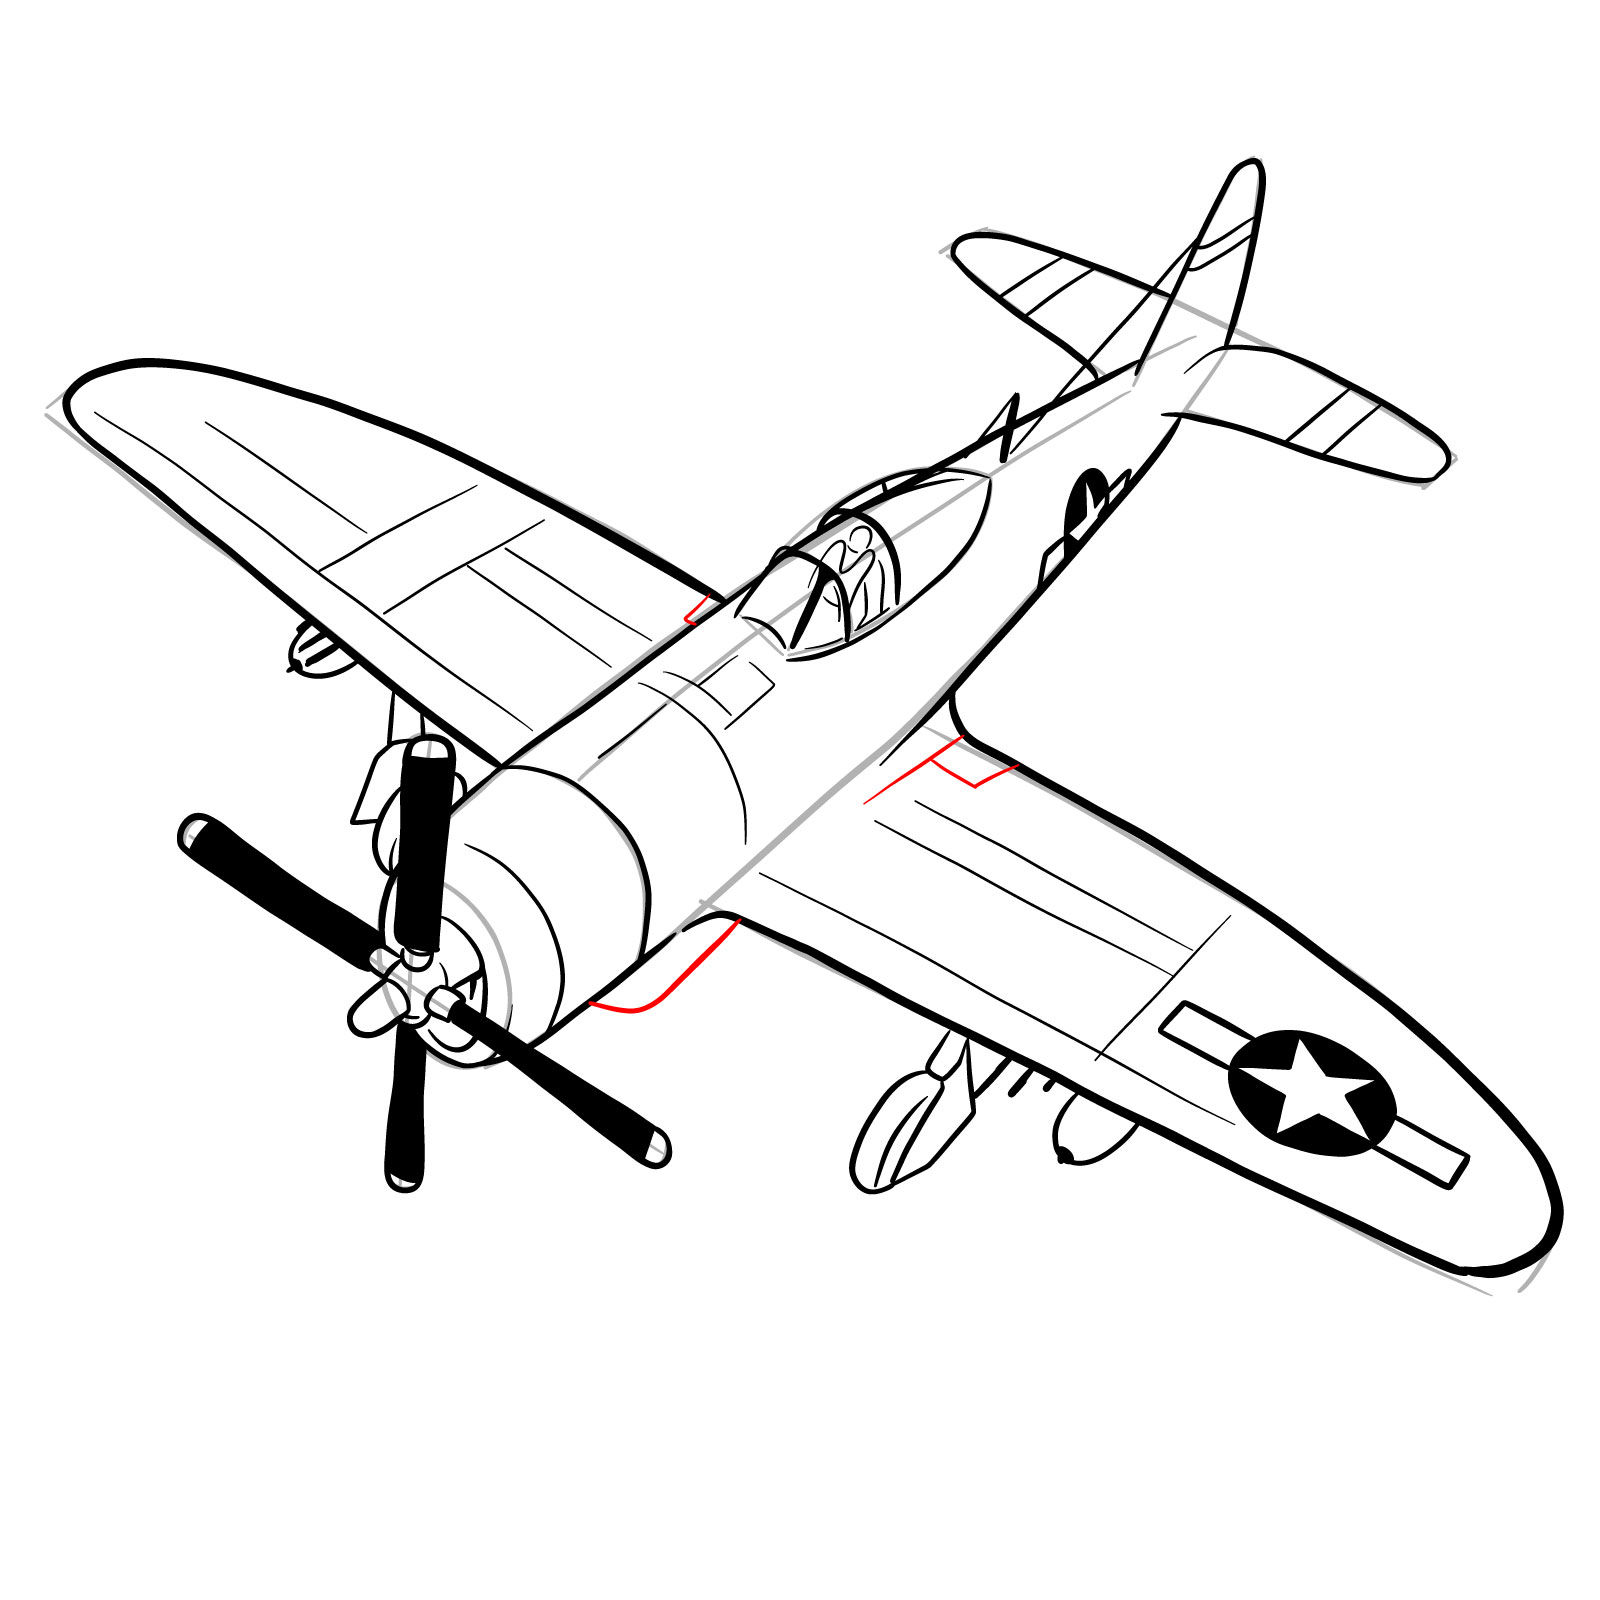 How to draw the Republic P-47 Thunderbolt - step 28